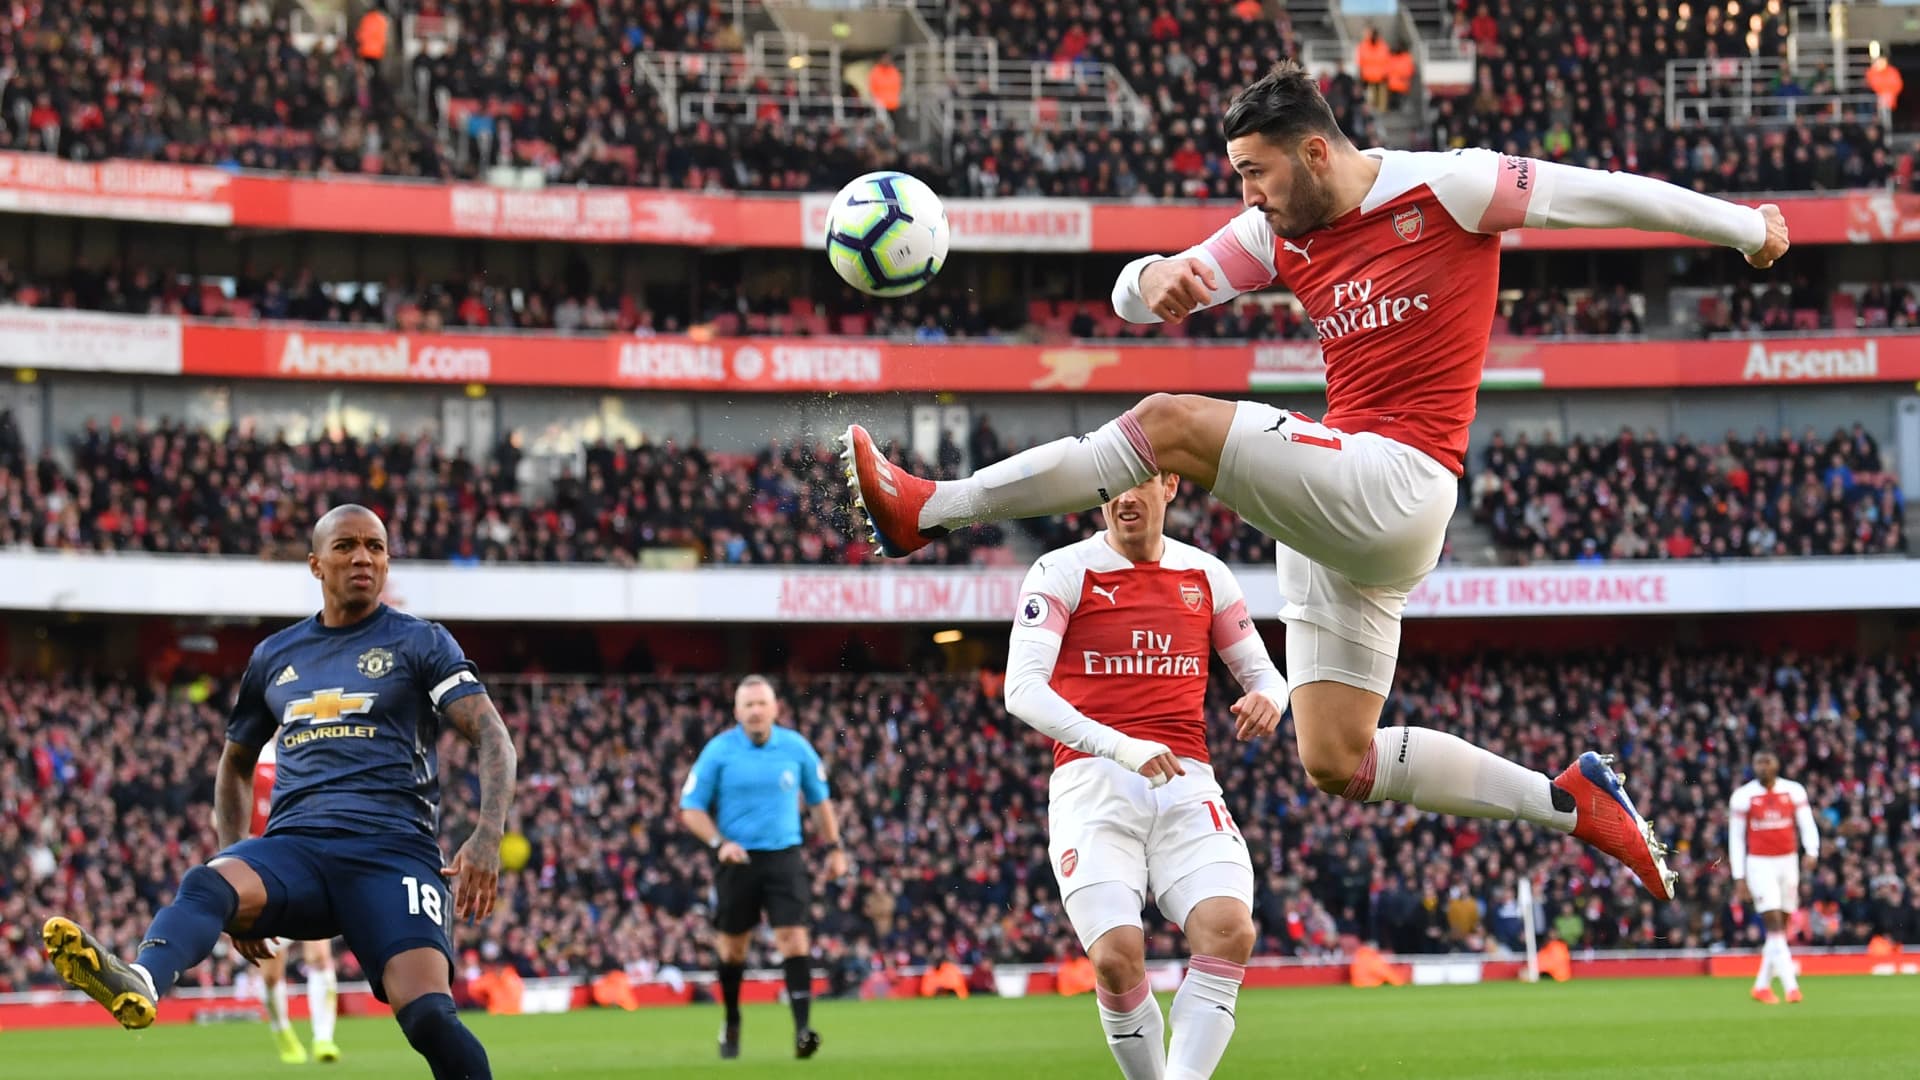 Arsenal's German-born Bosnian defender Sead Kolasinac (R) plays the ball during the English Premier League football match between Arsenal and Manchester United at the Emirates Stadium in London on March 10, 2019.